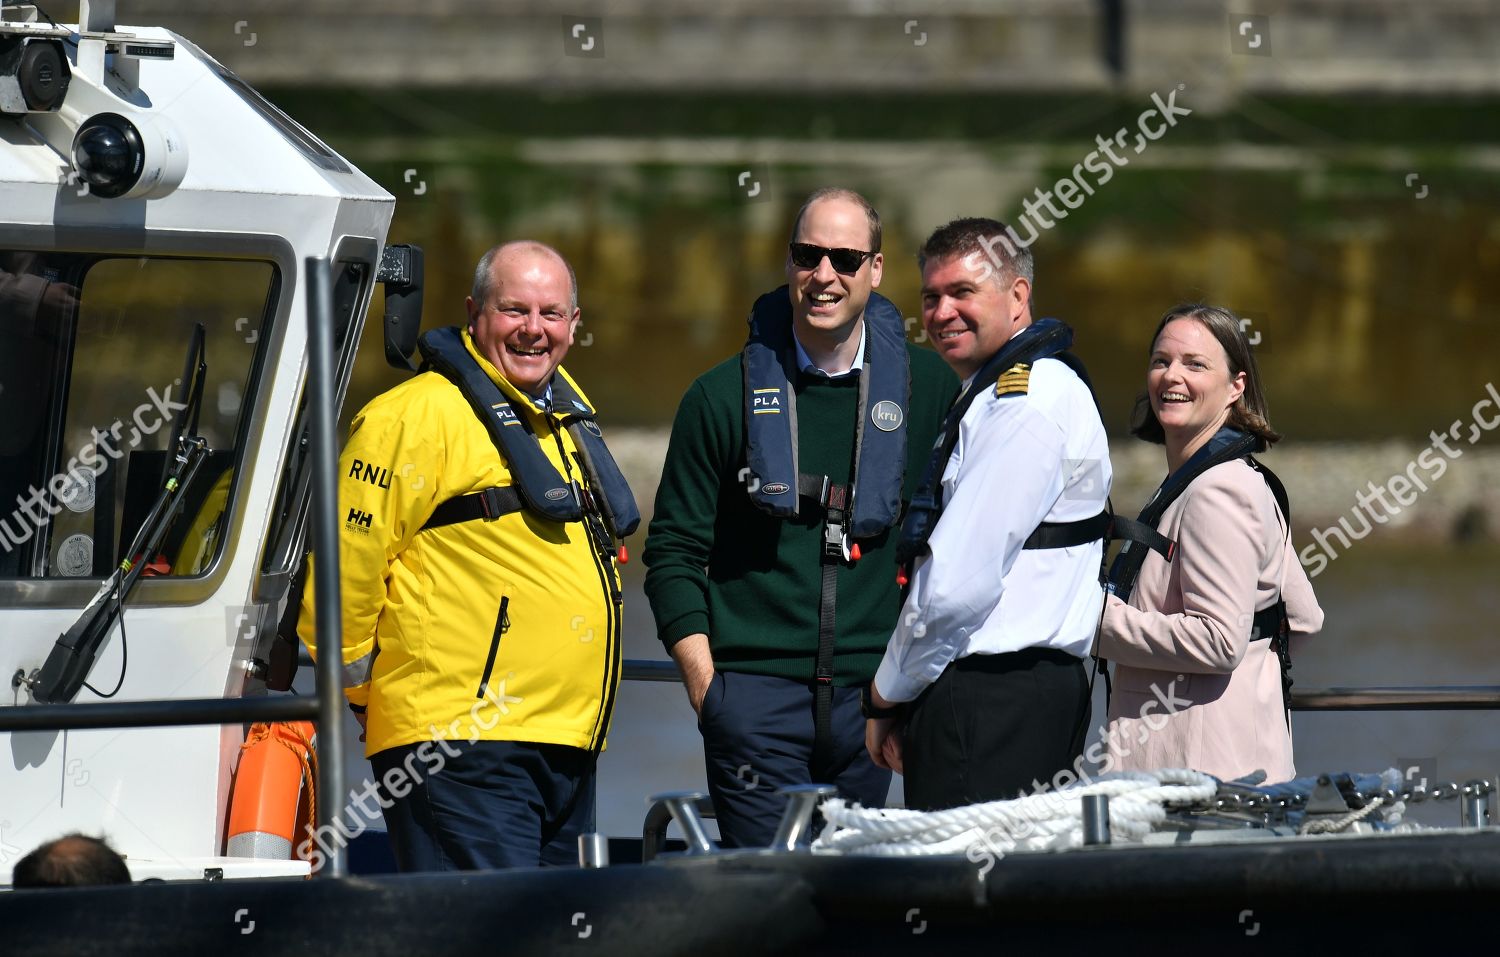 river-safety-campaign-launch-london-uk-shutterstock-editorial-10242405b.jpg